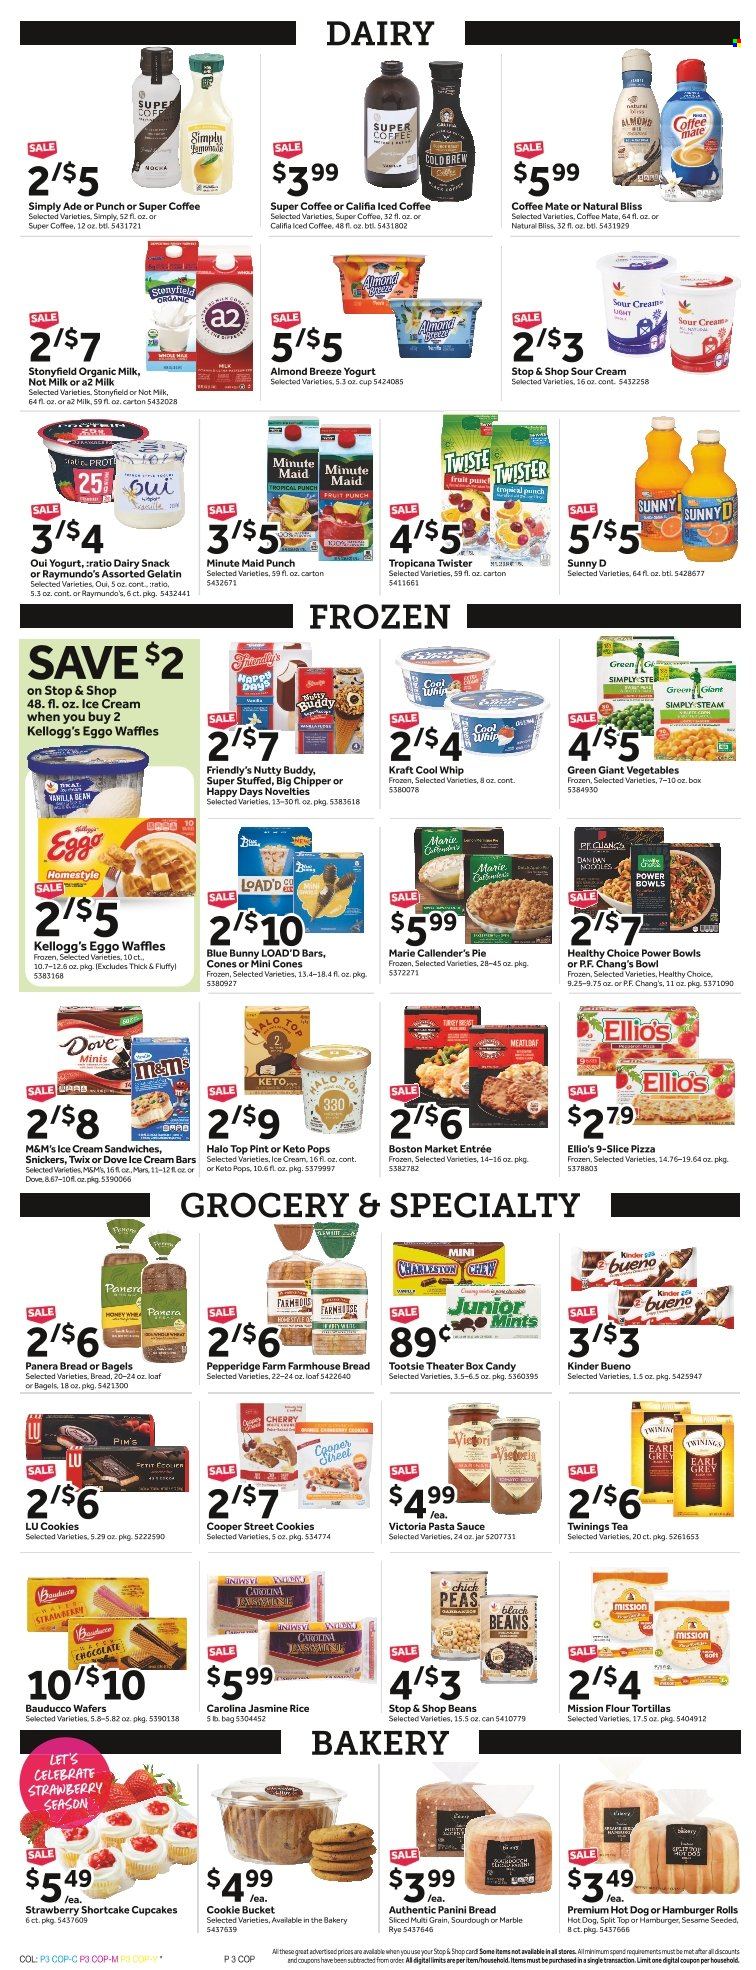 thumbnail - Stop & Shop Flyer - 05/20/2022 - 05/26/2022 - Sales products - bagels, tortillas, cake, pie, panini, burger buns, flour tortillas, sandwich rolls, cupcake, waffles, pastries, hamburger, hot dog, pizza, pasta sauce, sauce, Healthy Choice, Marie Callender's, Kraft®, ready meal, dairy snack, Coffee-Mate, organic milk, Almond Breeze, coffee drink, Cool Whip, sour cream, Dove, ice cream sandwich, Friendly's Ice Cream, Blue Bunny, frozen vegetables, wafers, Twix, Mars, M&M's, Kellogg's, Kinder Bueno, Candy, sweets, canned vegetables, rice, chickpeas, jasmine rice, fruit drink, Twister, fruit punch, Sunny D, iced coffee, tea, Twinings, bucket, gelatin. Page 3.